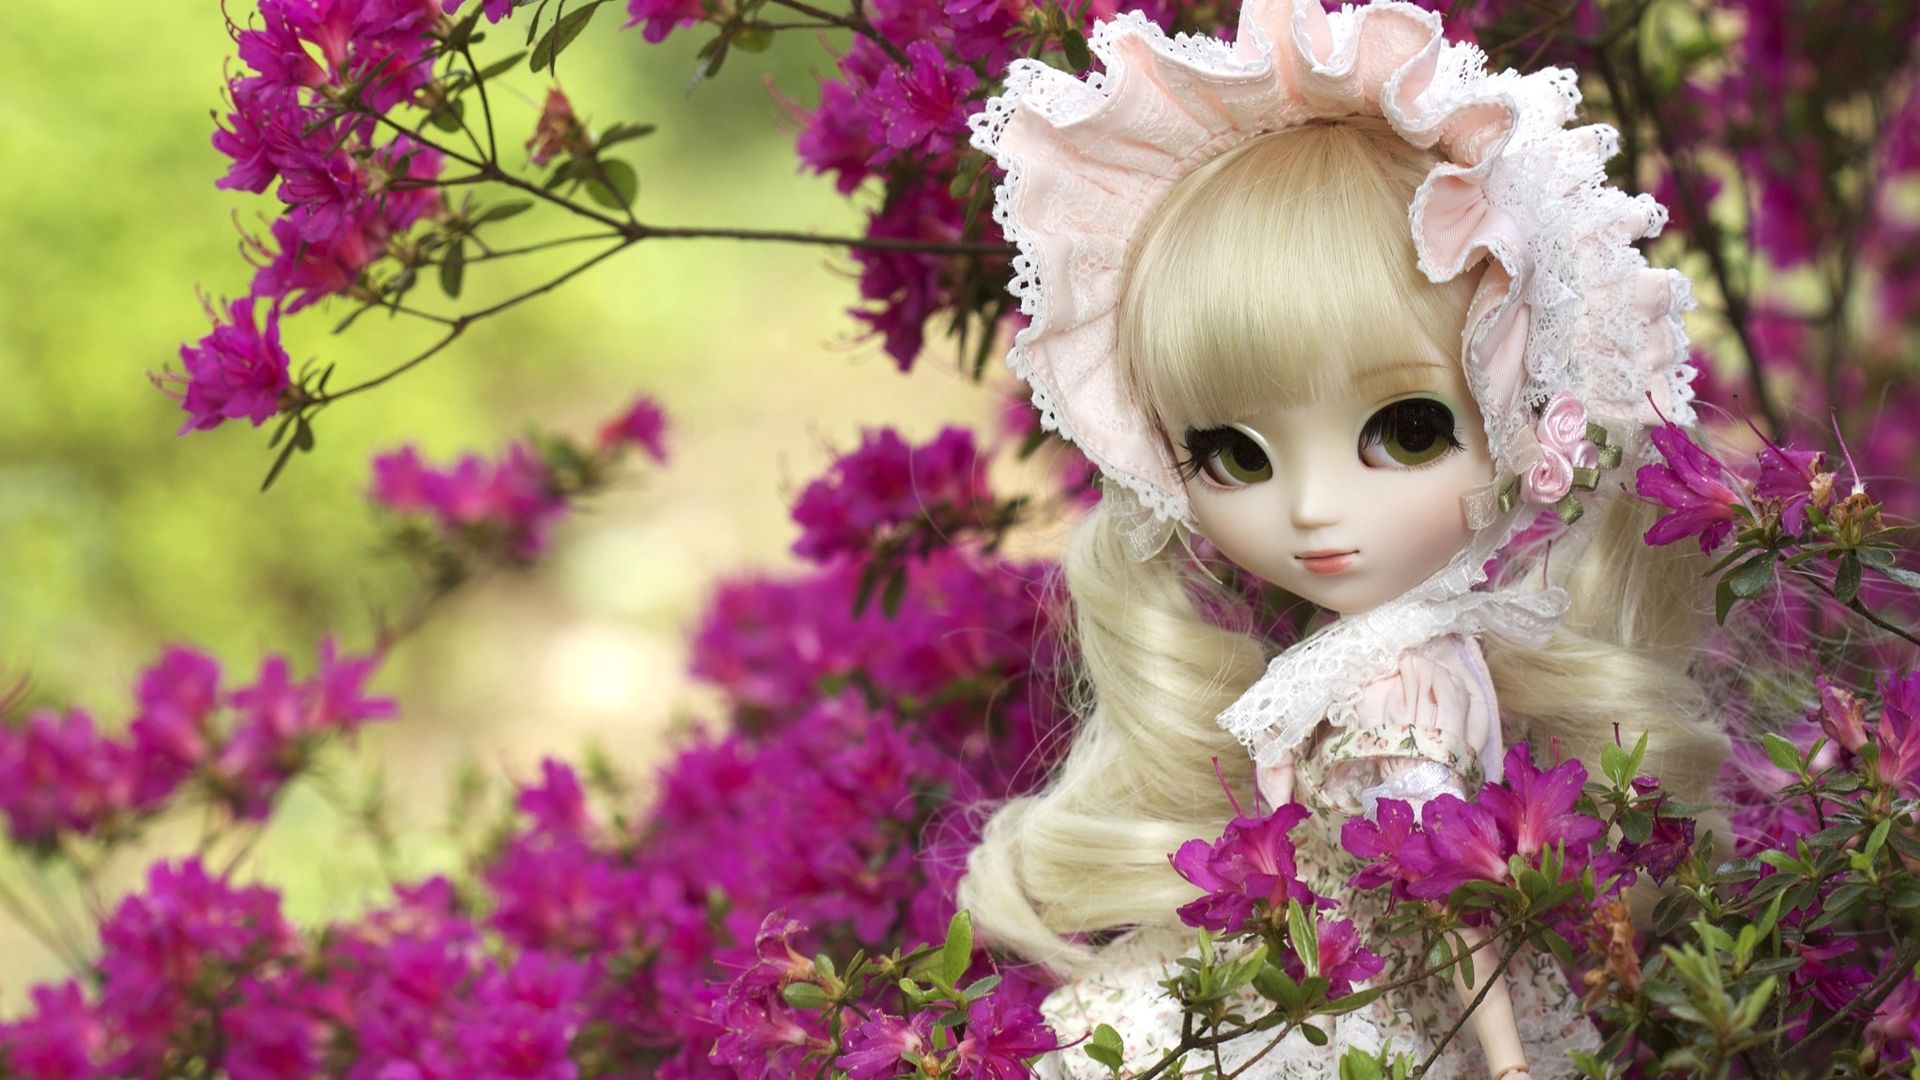 Free download Related to Best and Cute baby doll barbi doll image